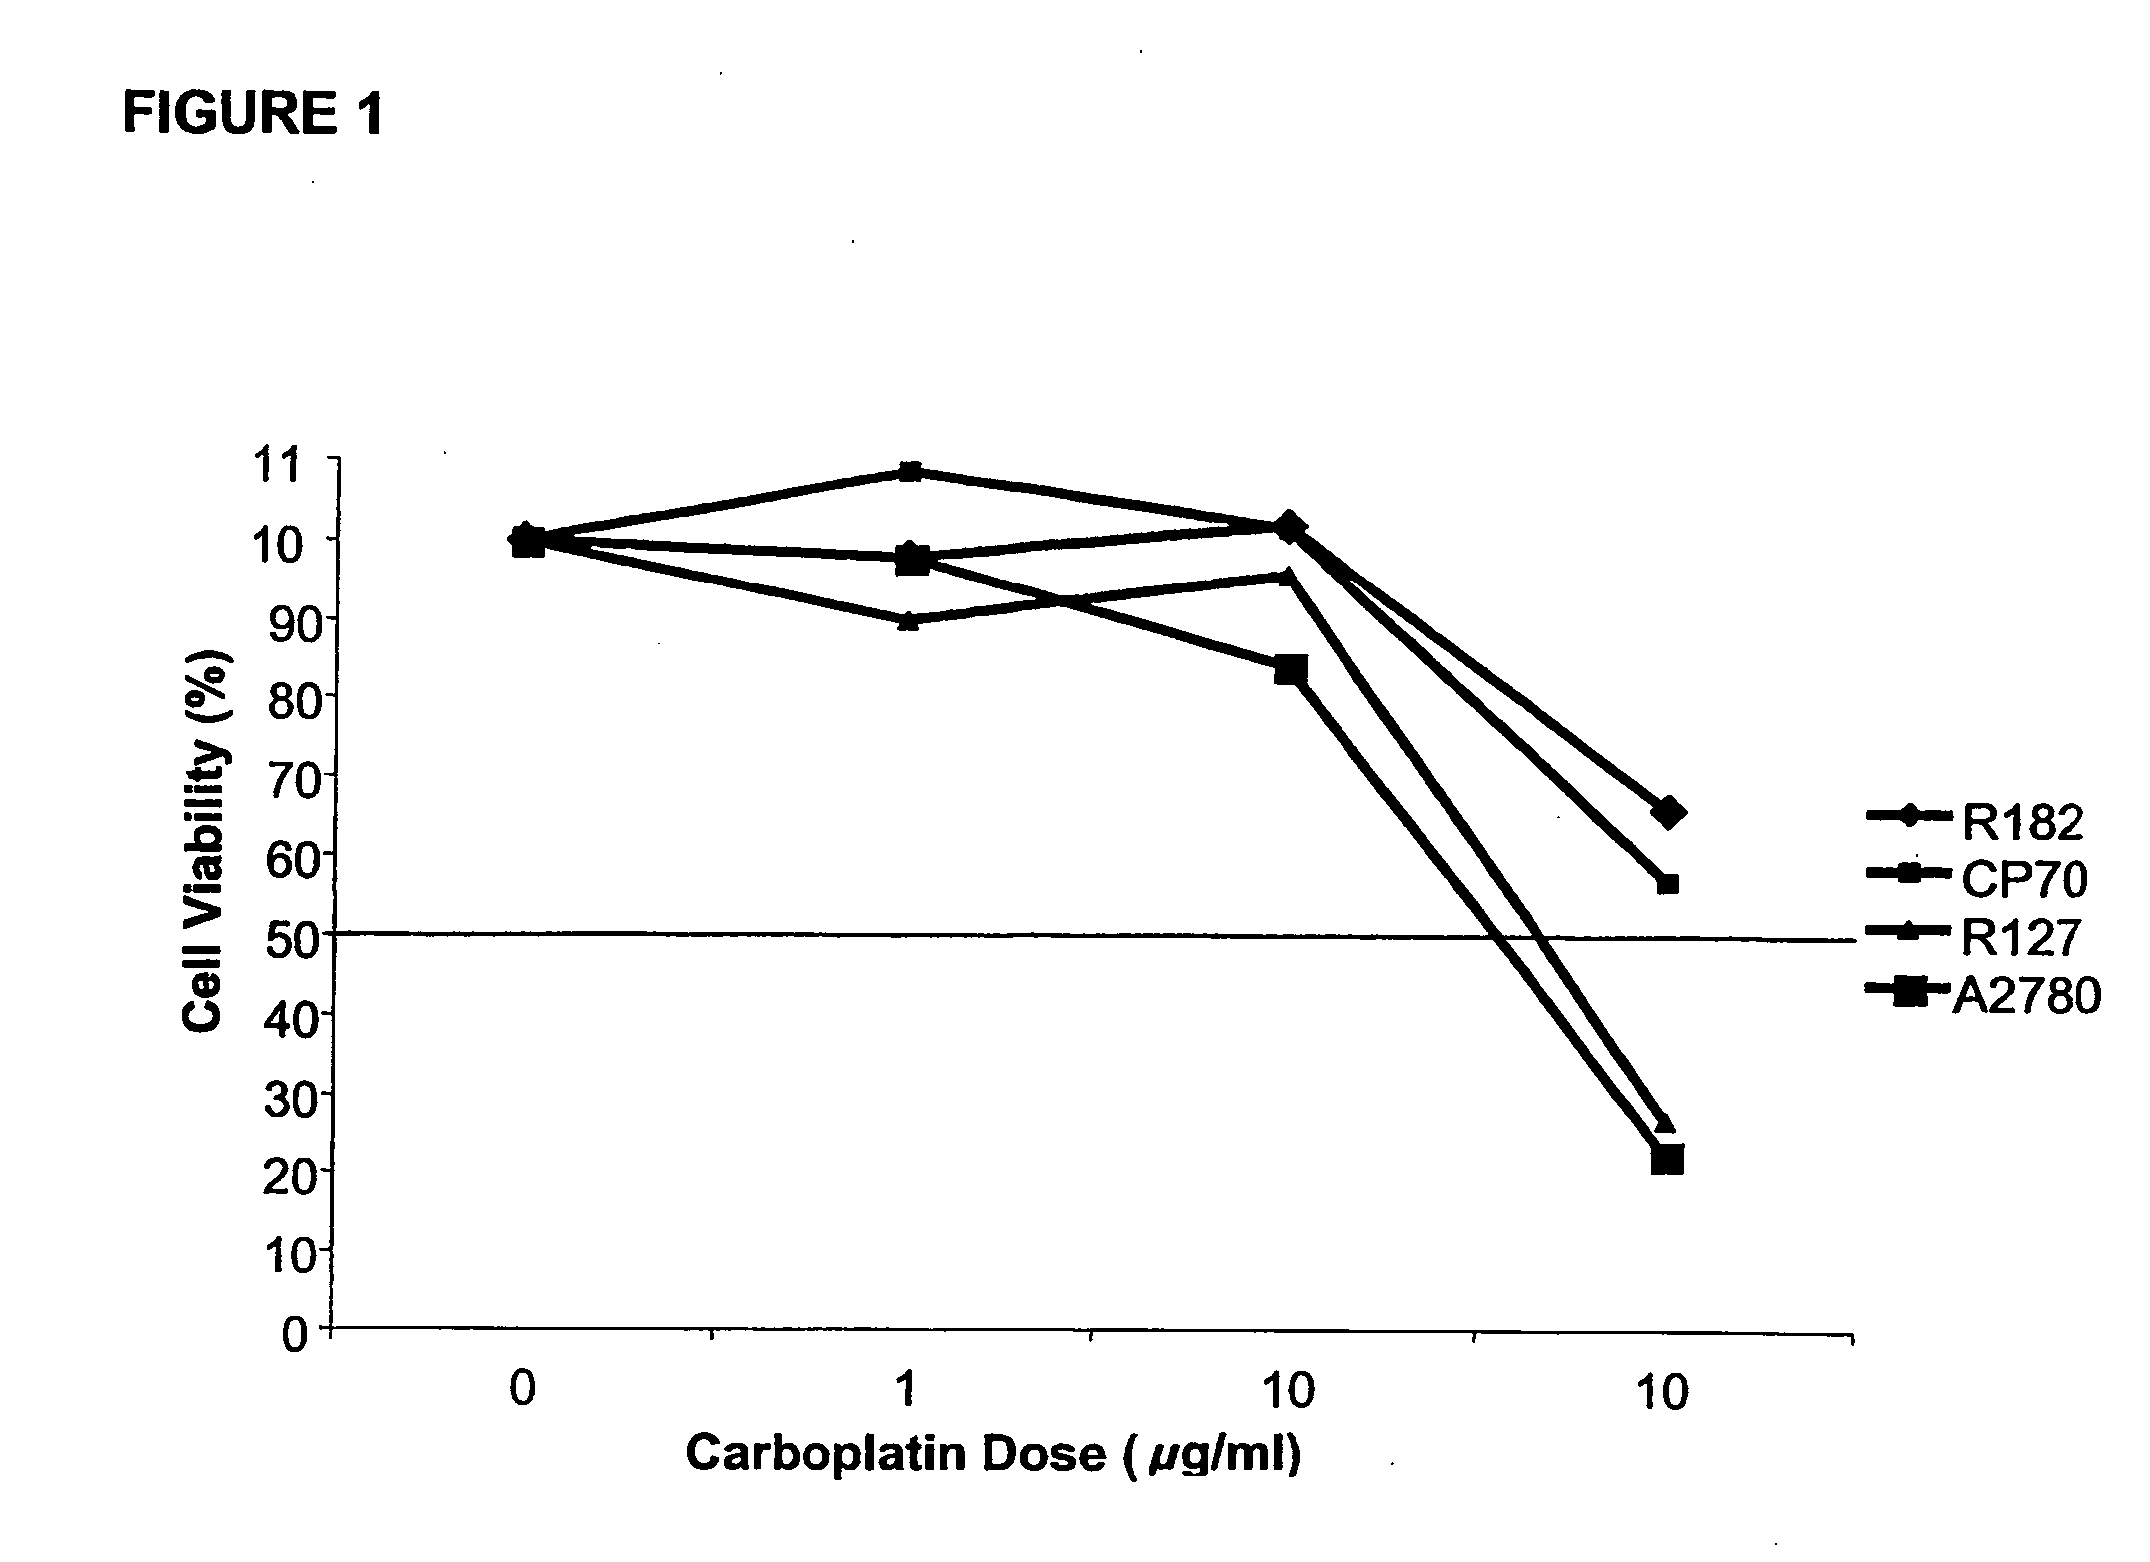 Combination chemotherapy compositions and methods